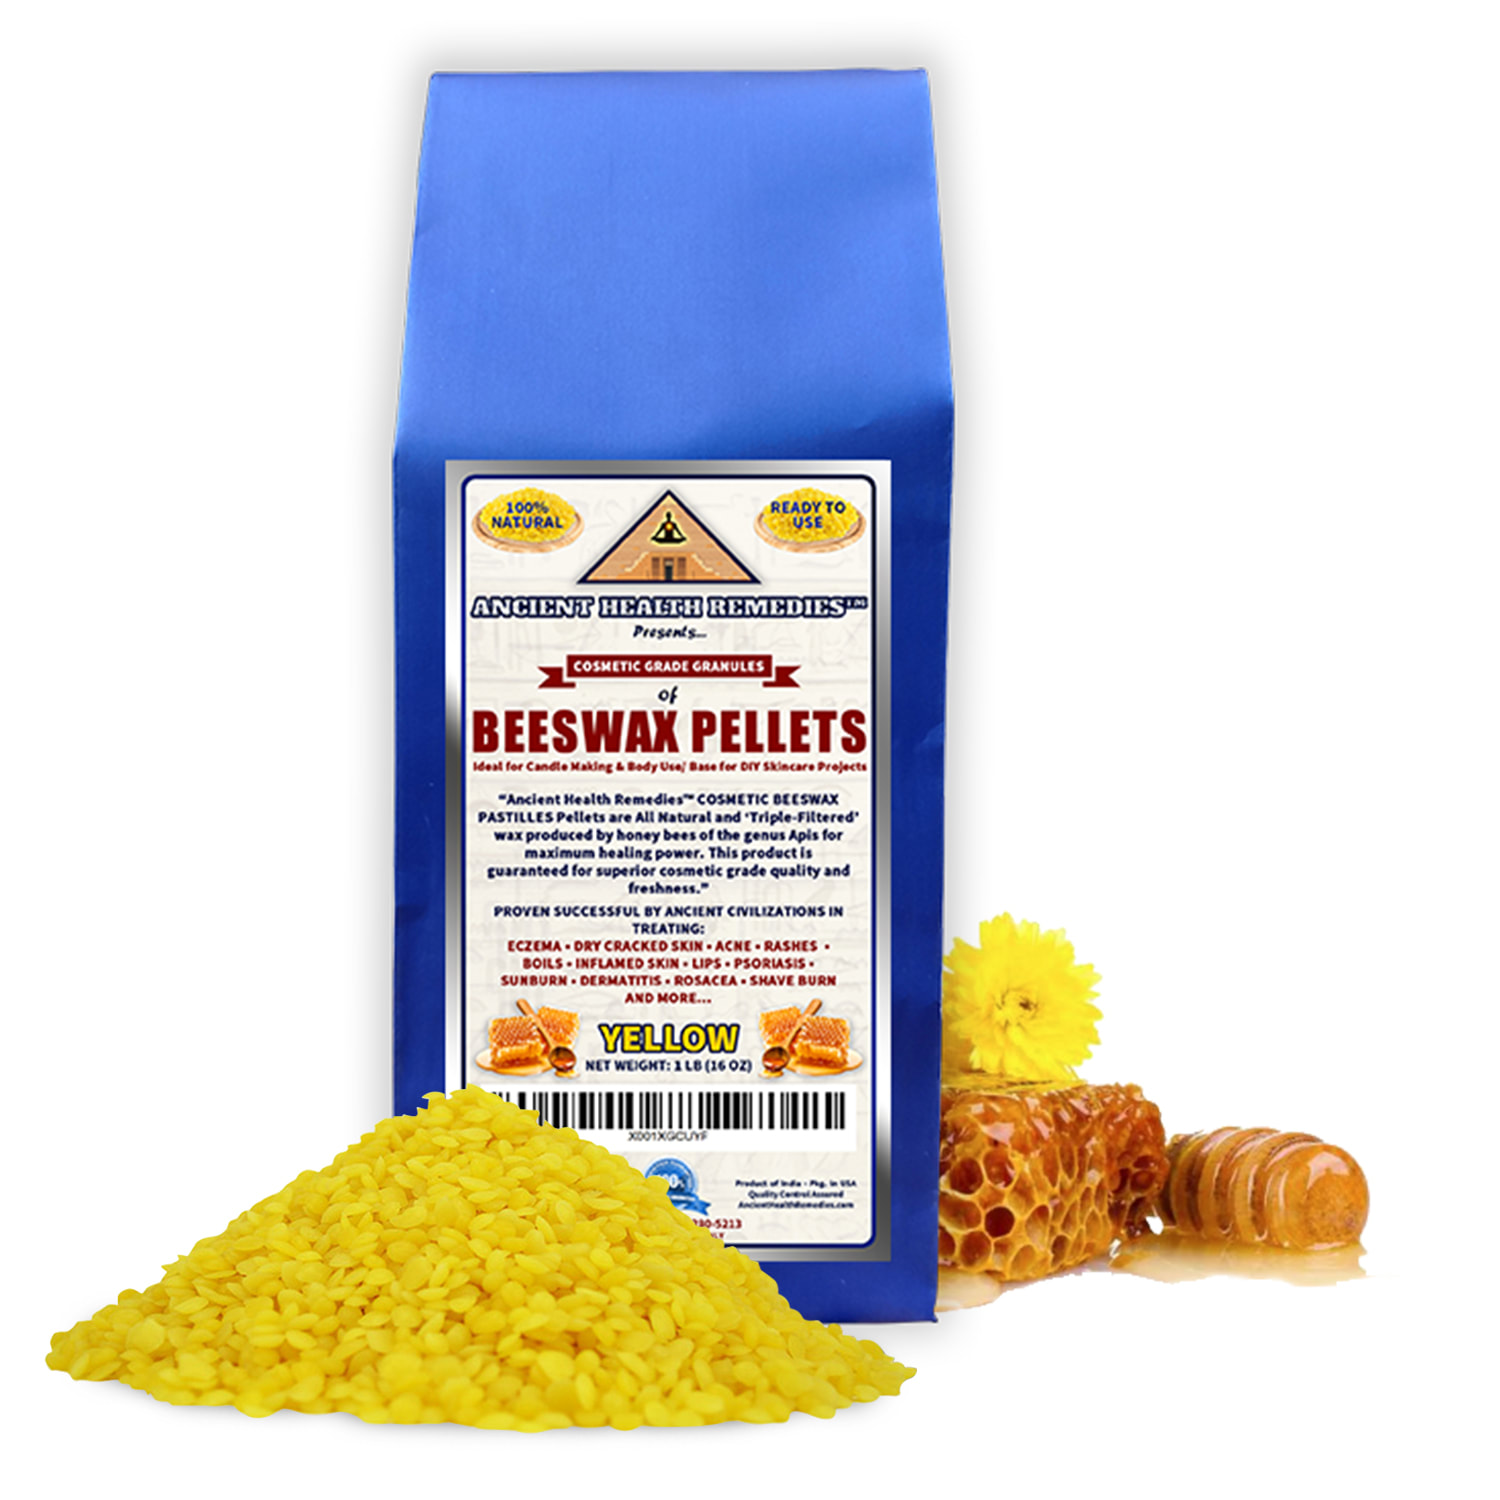 Organic Beeswax Pellets, Natural, Yellow, Filtered 1 POUND, Free